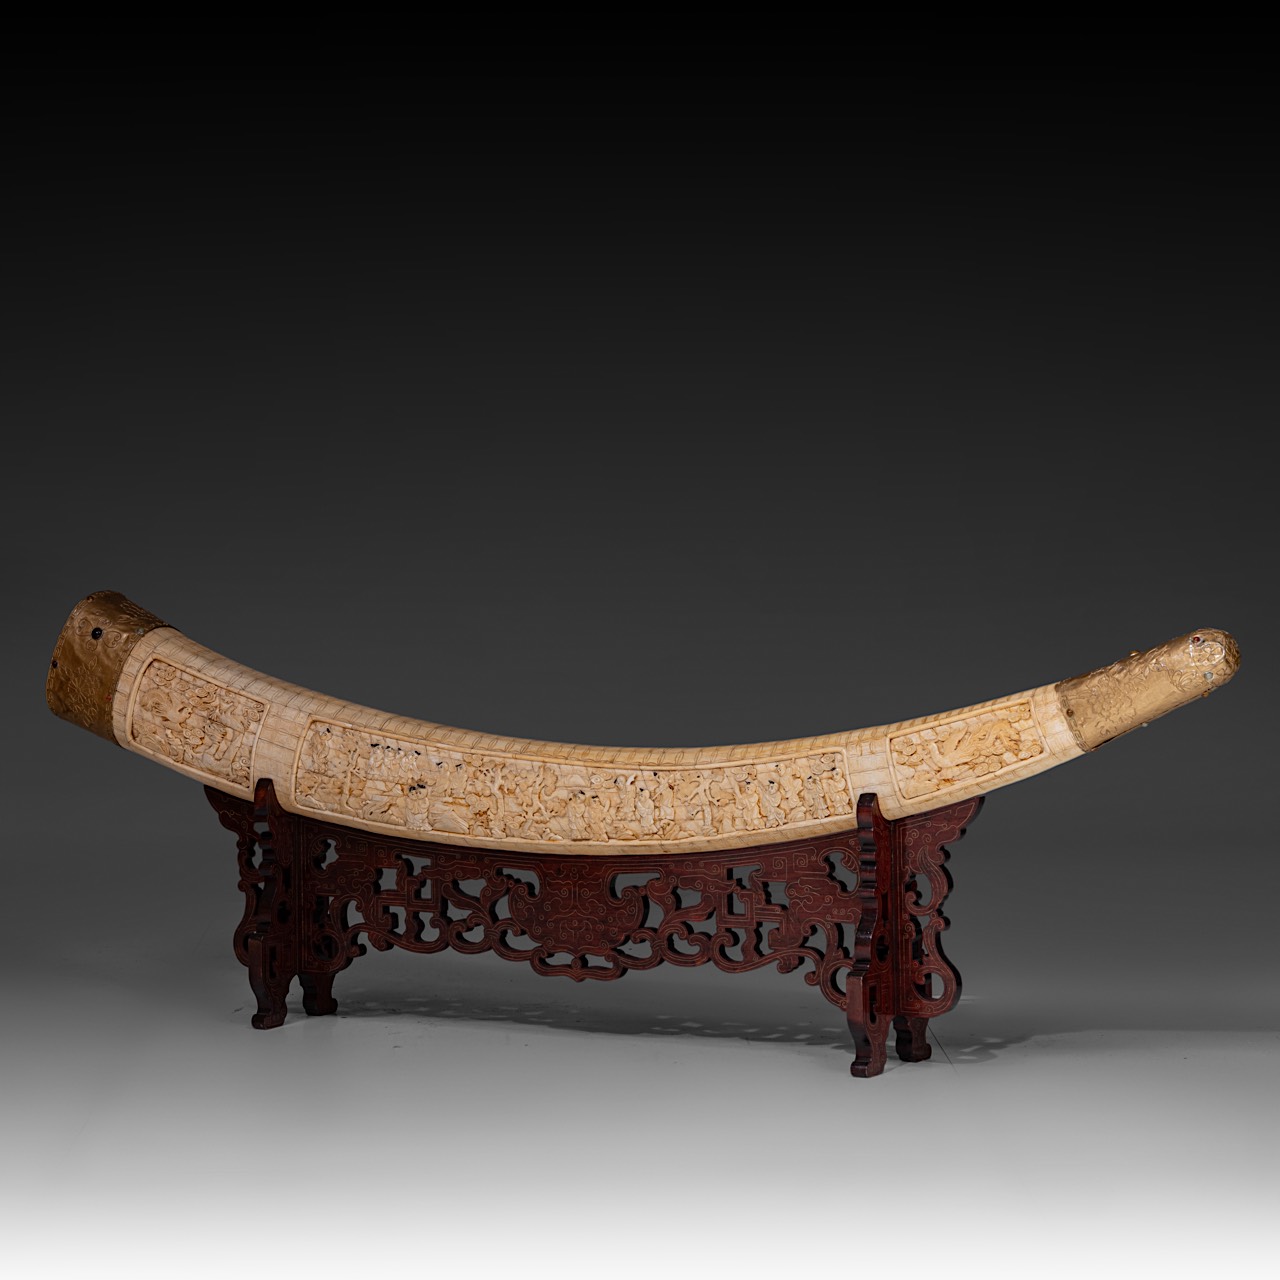 Tusk made from sculpted bone slats, Qing/Republic period, inner arch 165 cm - outer arch 175 cm - Image 4 of 13